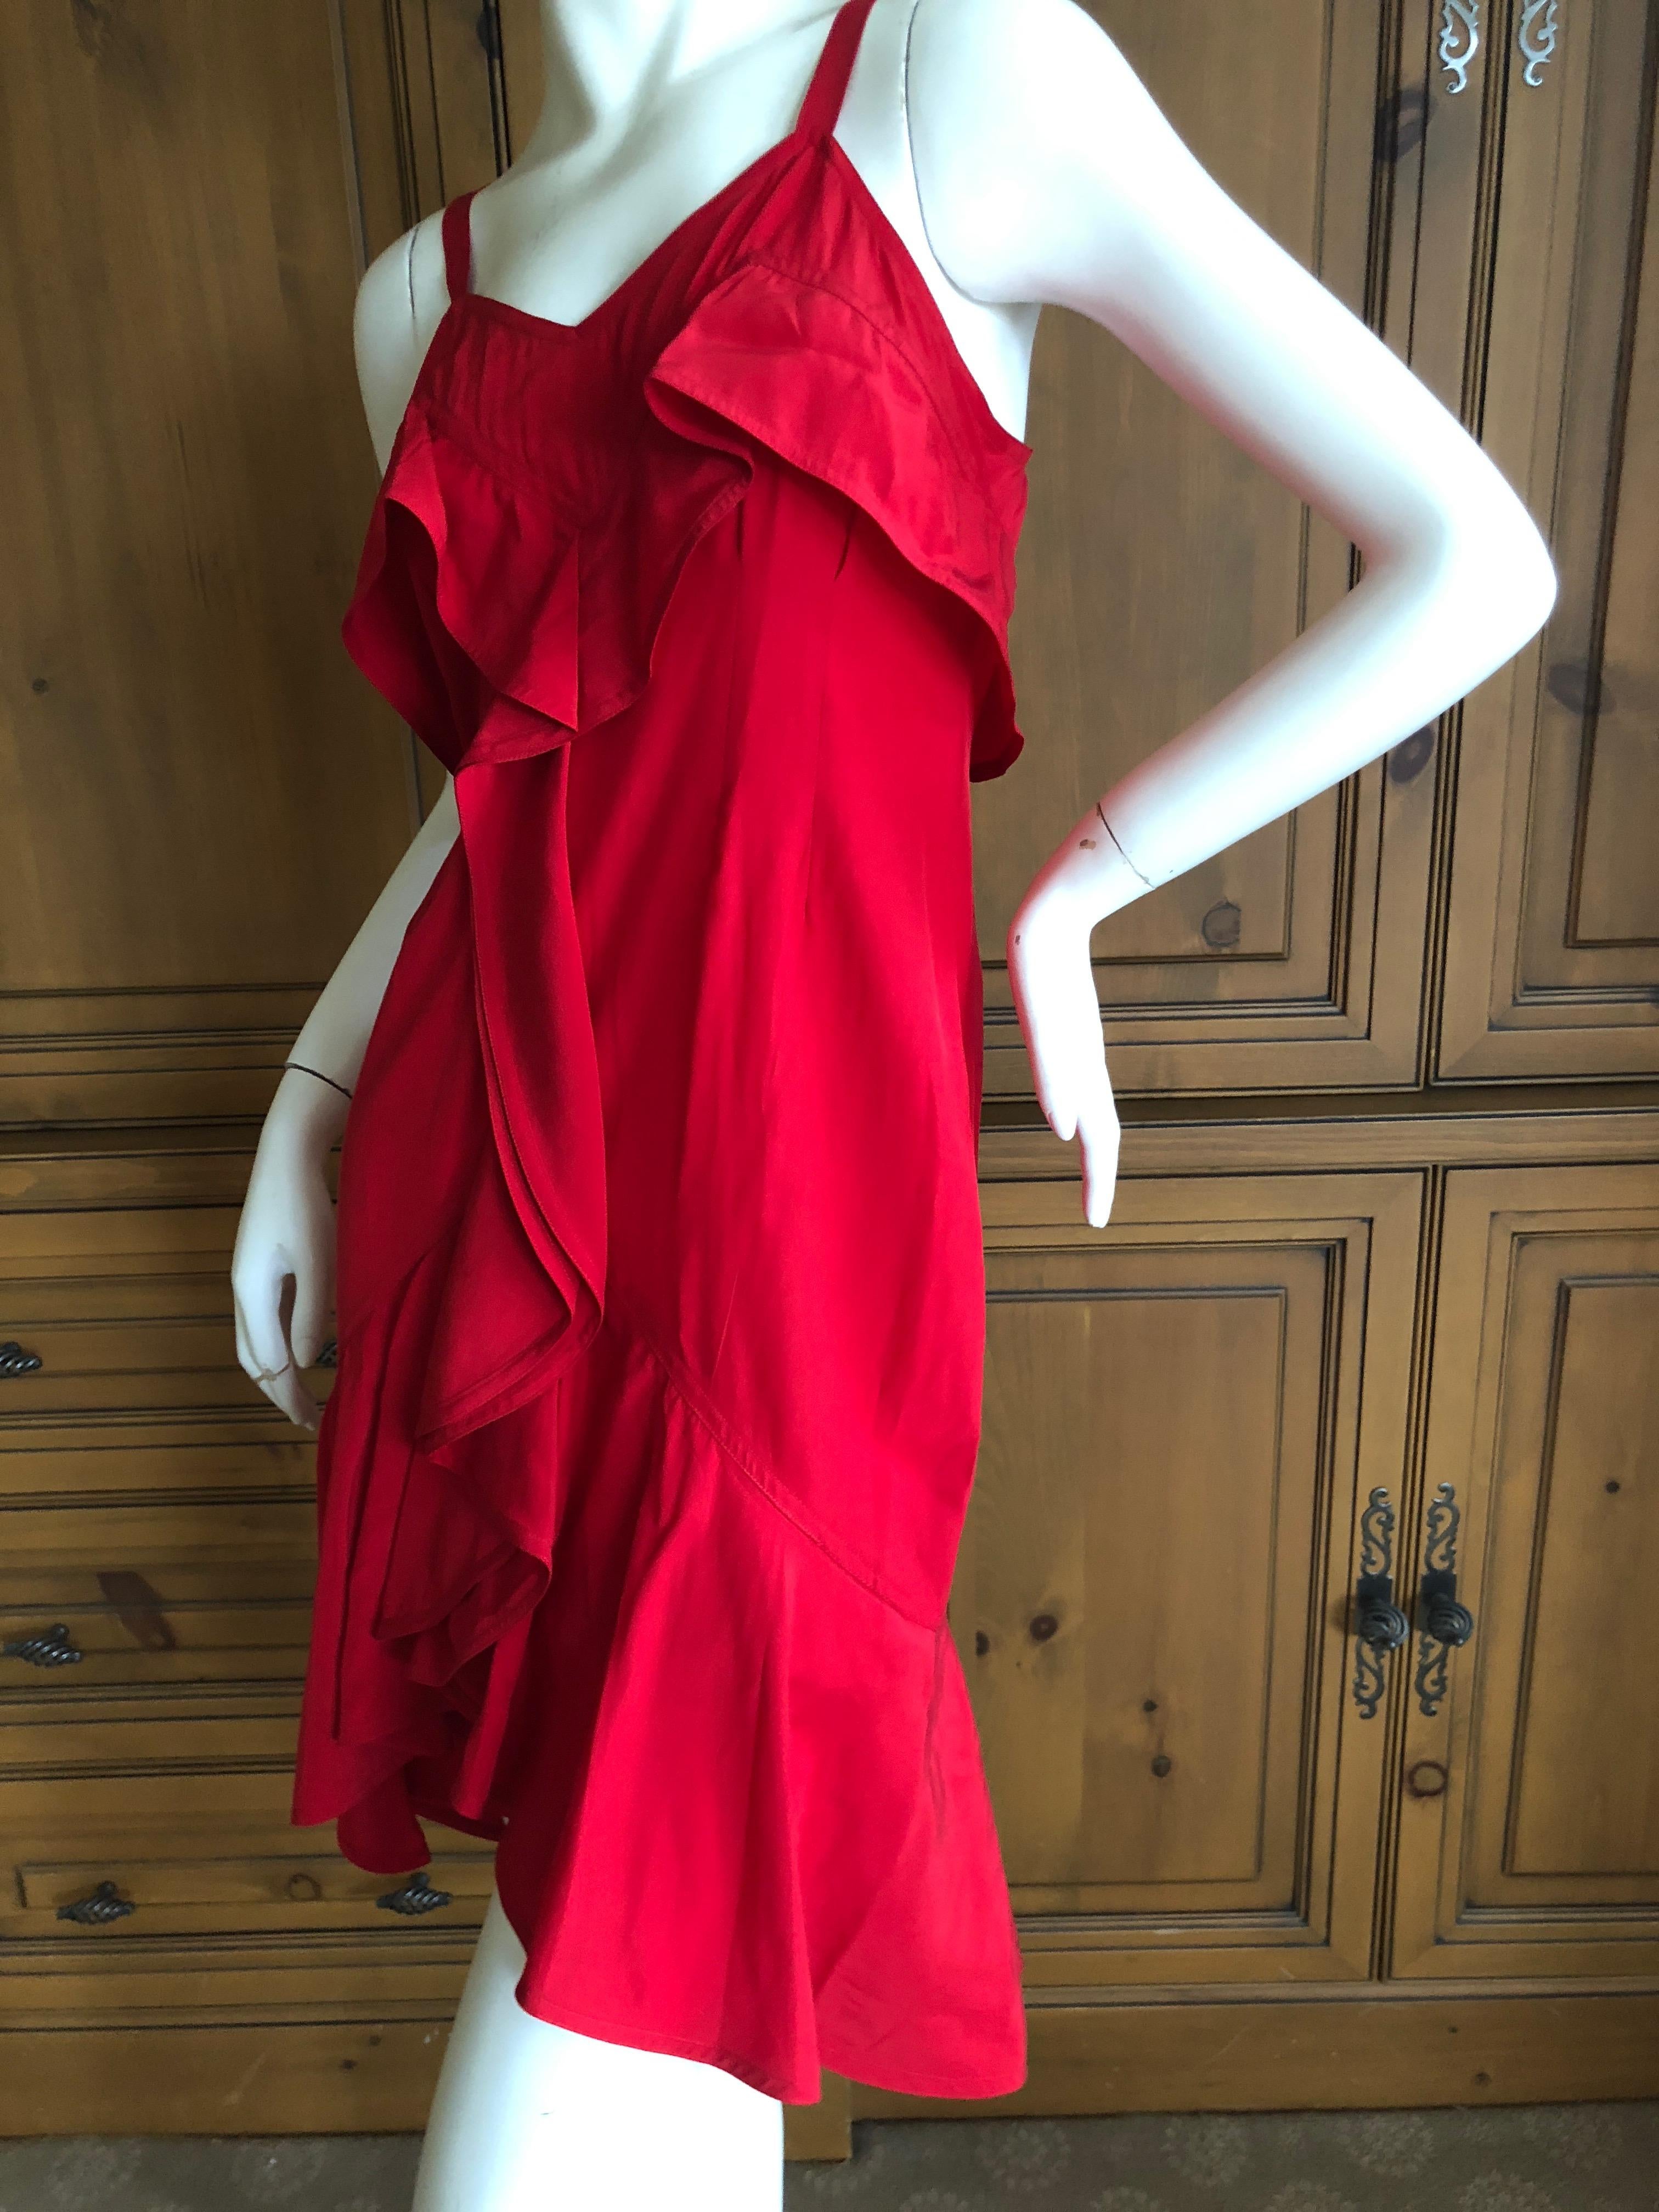 Yves Saint Laurent Tom Ford Fall 2003 Look 1 Red Ruffle Dress.

Size 44 Runs small
Bust 38